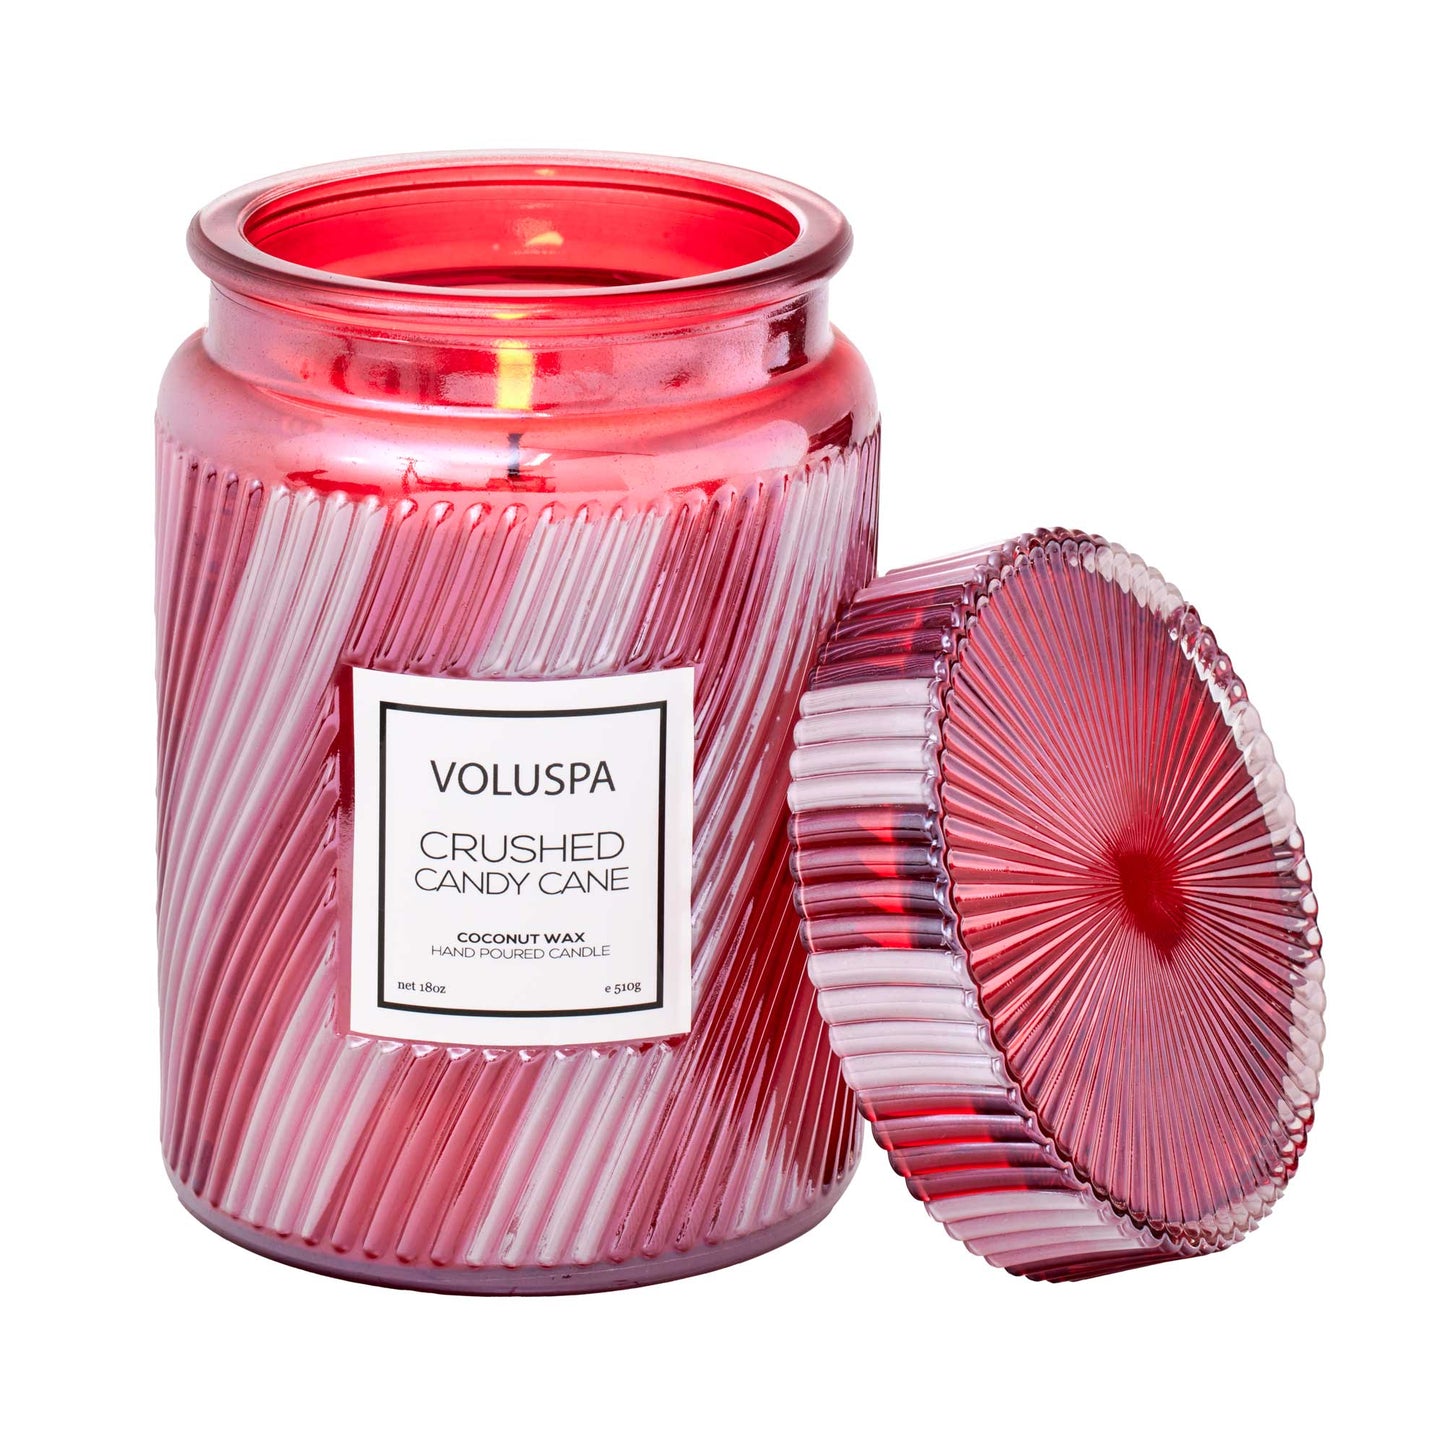 Voluspa Crushed Candy Cane Candle Hand Poured in The U.S.A 